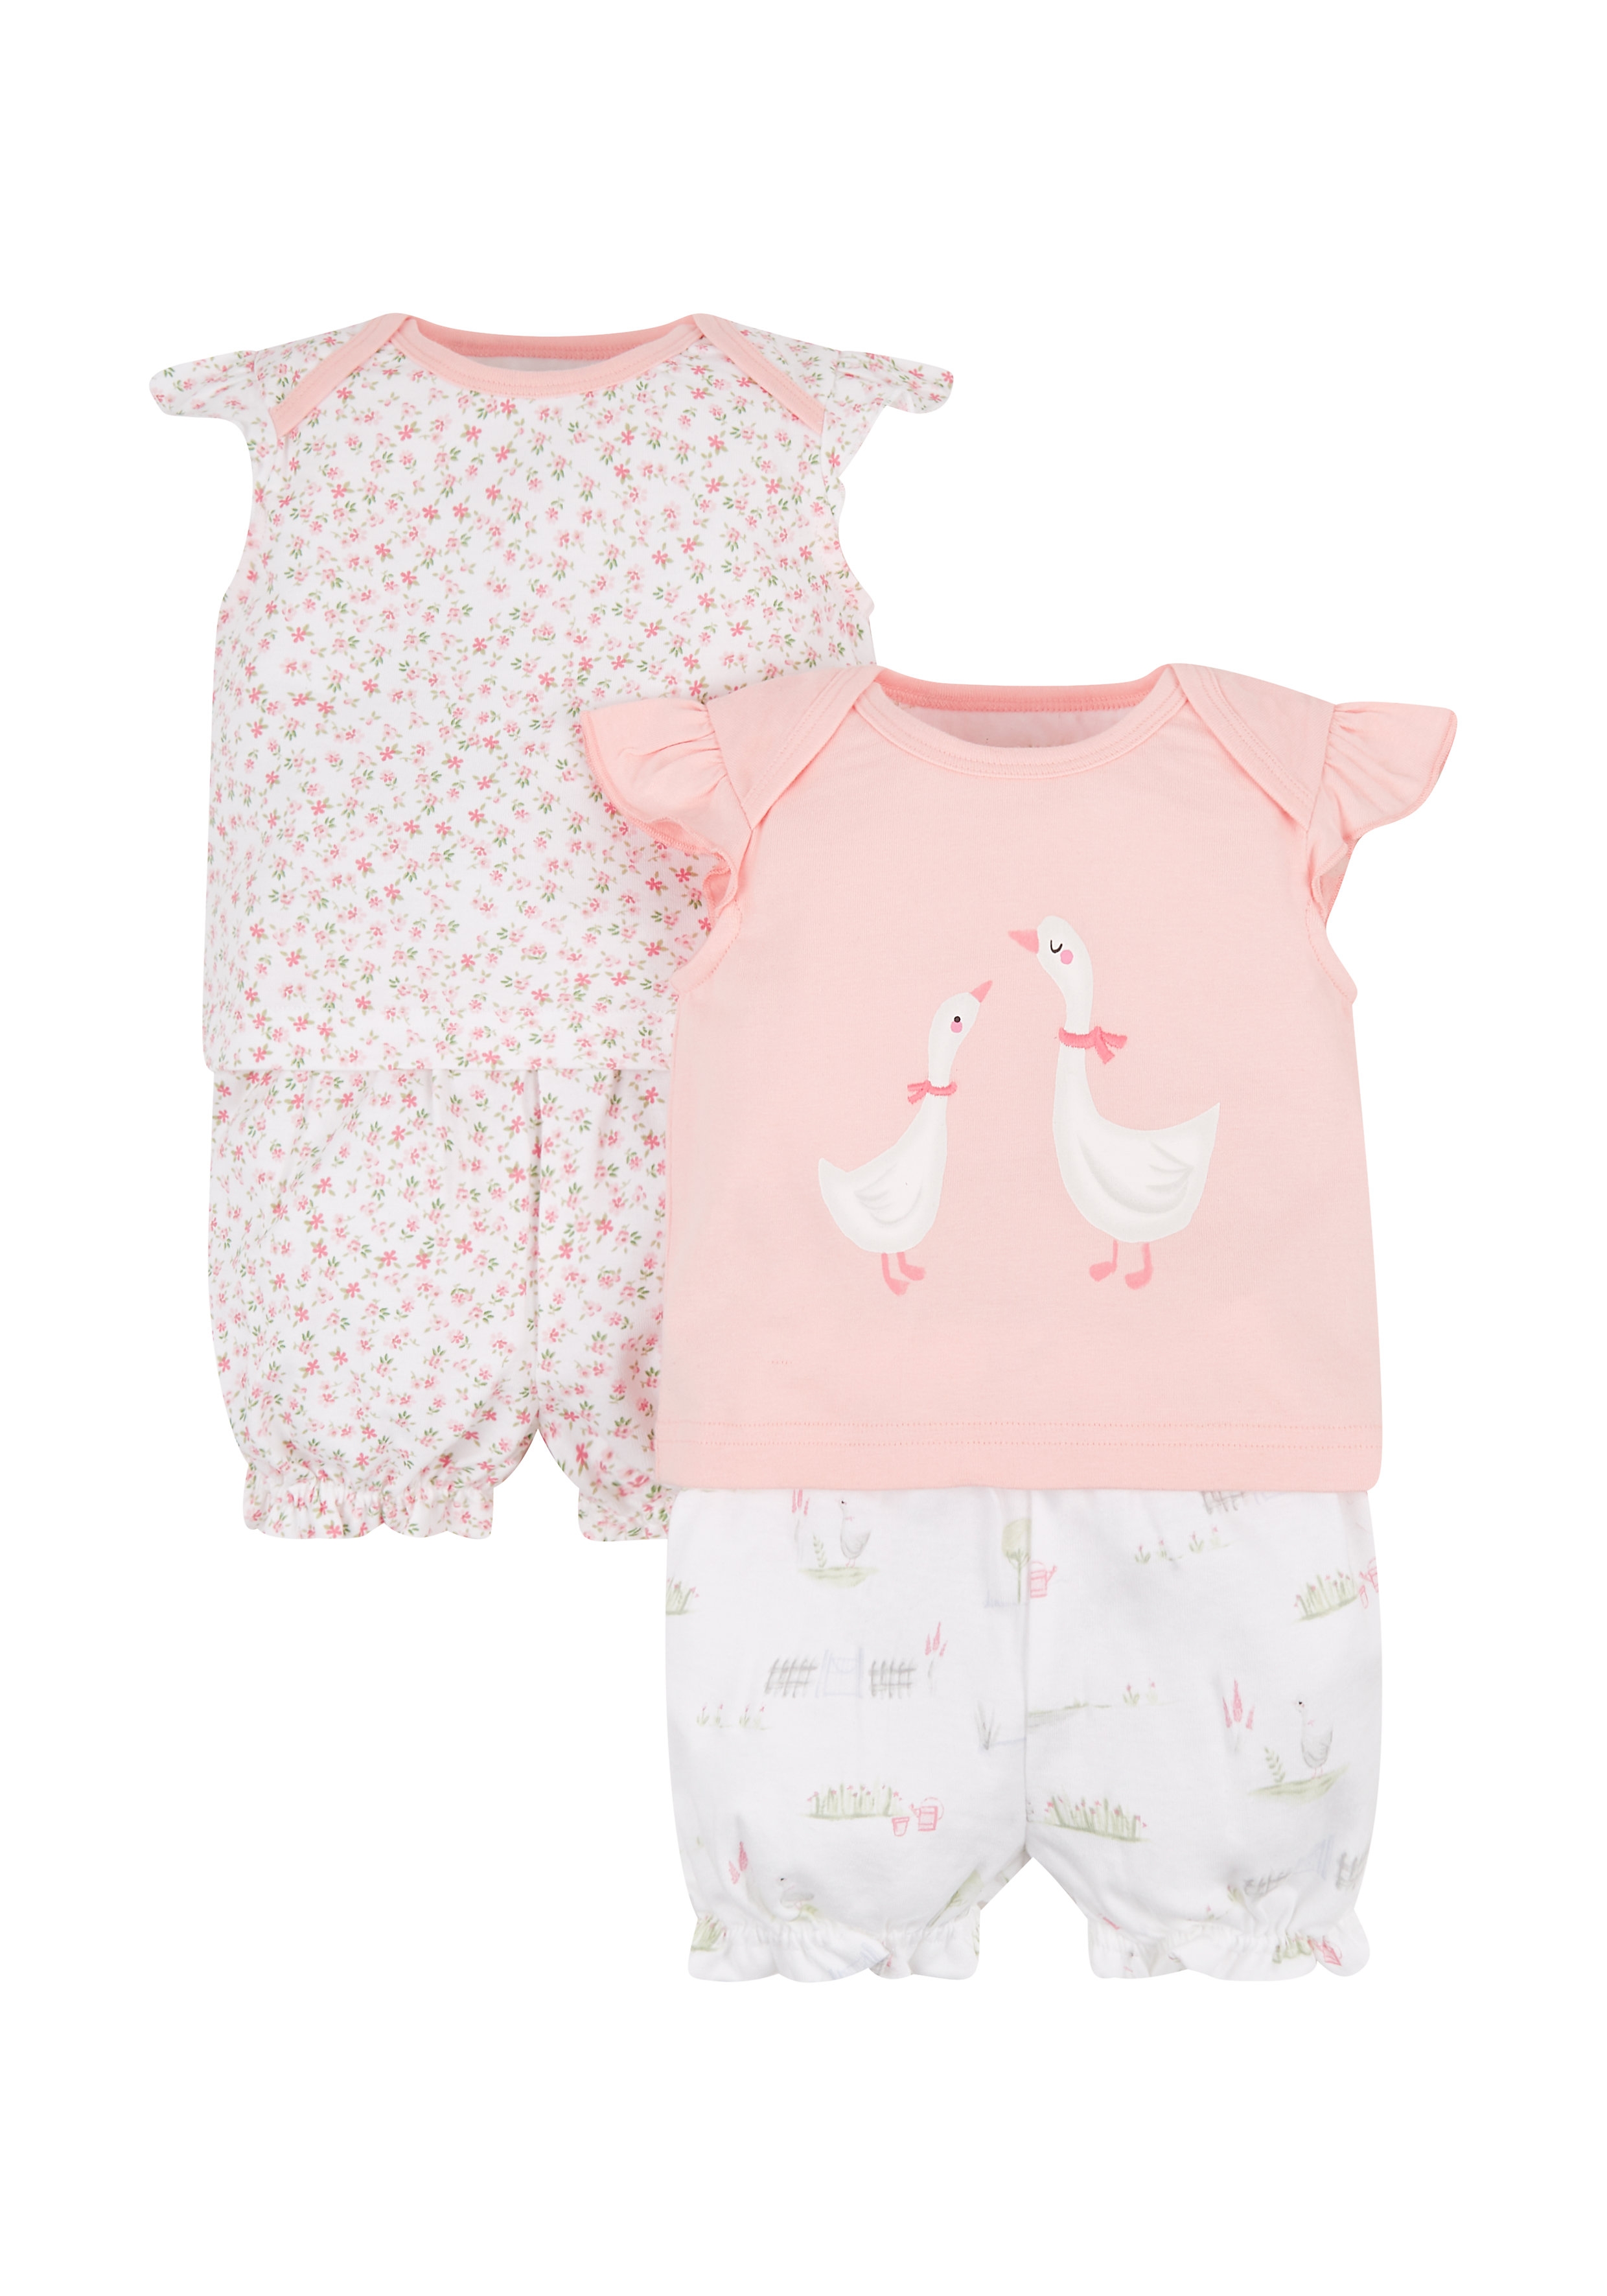 Mothercare | White and Peach Printed Nightsuit - Pack of 2